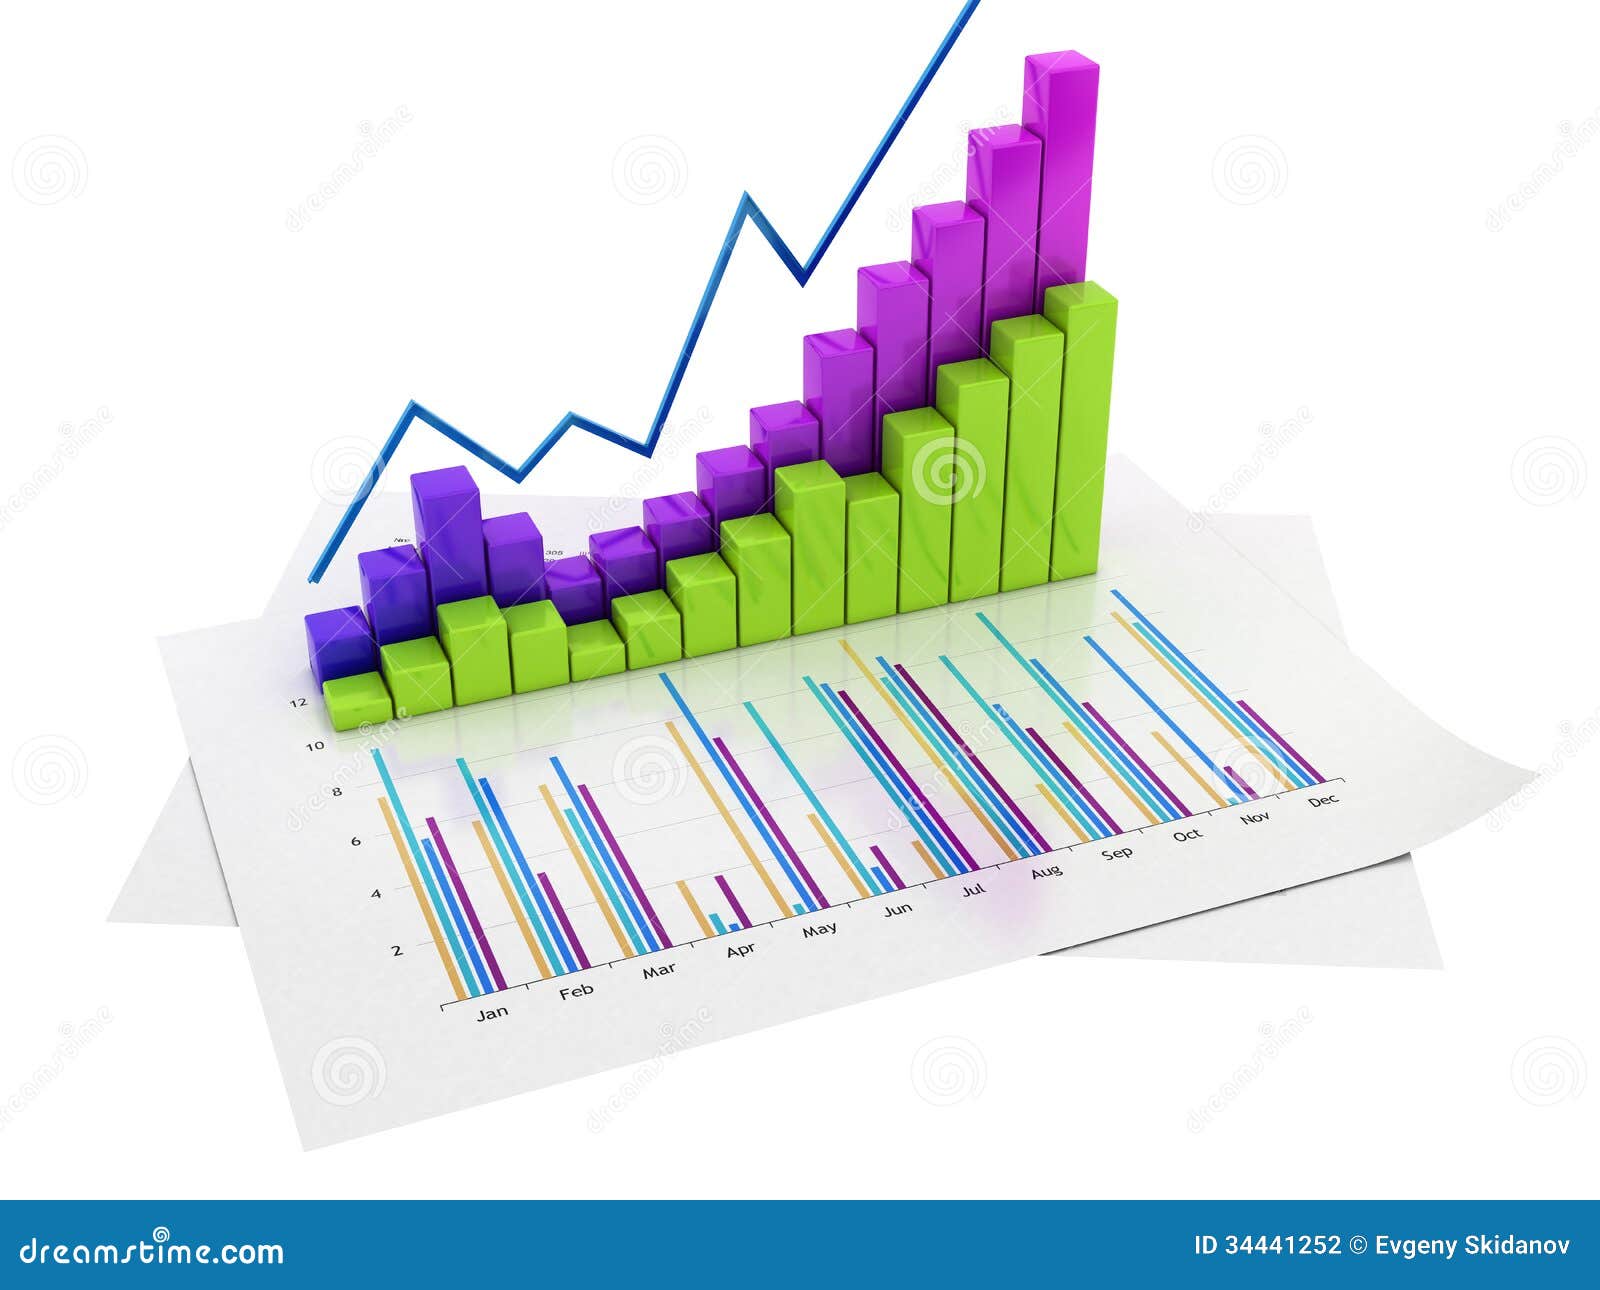 business analysis clipart - photo #42